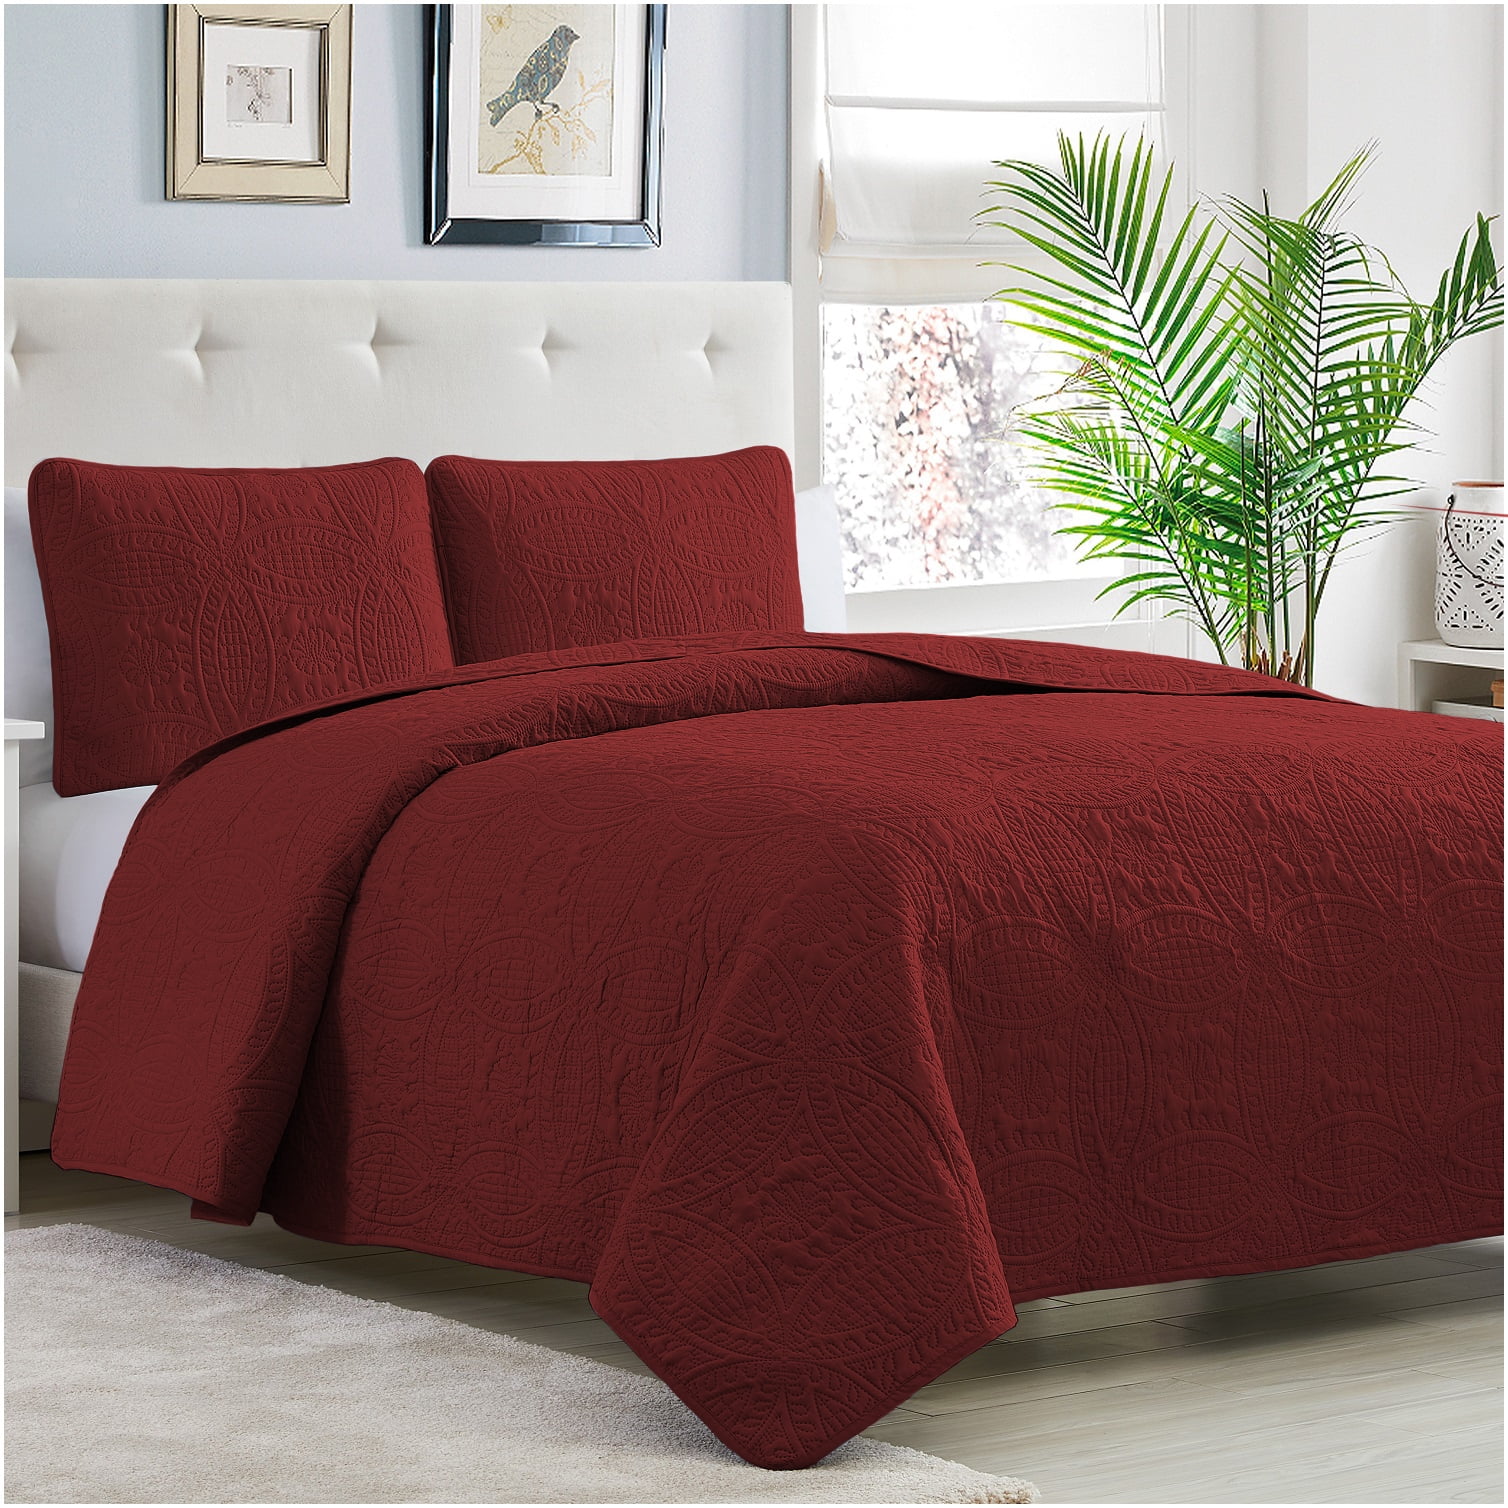 Details about   Duvet Quilt Cover Couple Bedding Set Sheet Double Queen King Pillowcase two side 